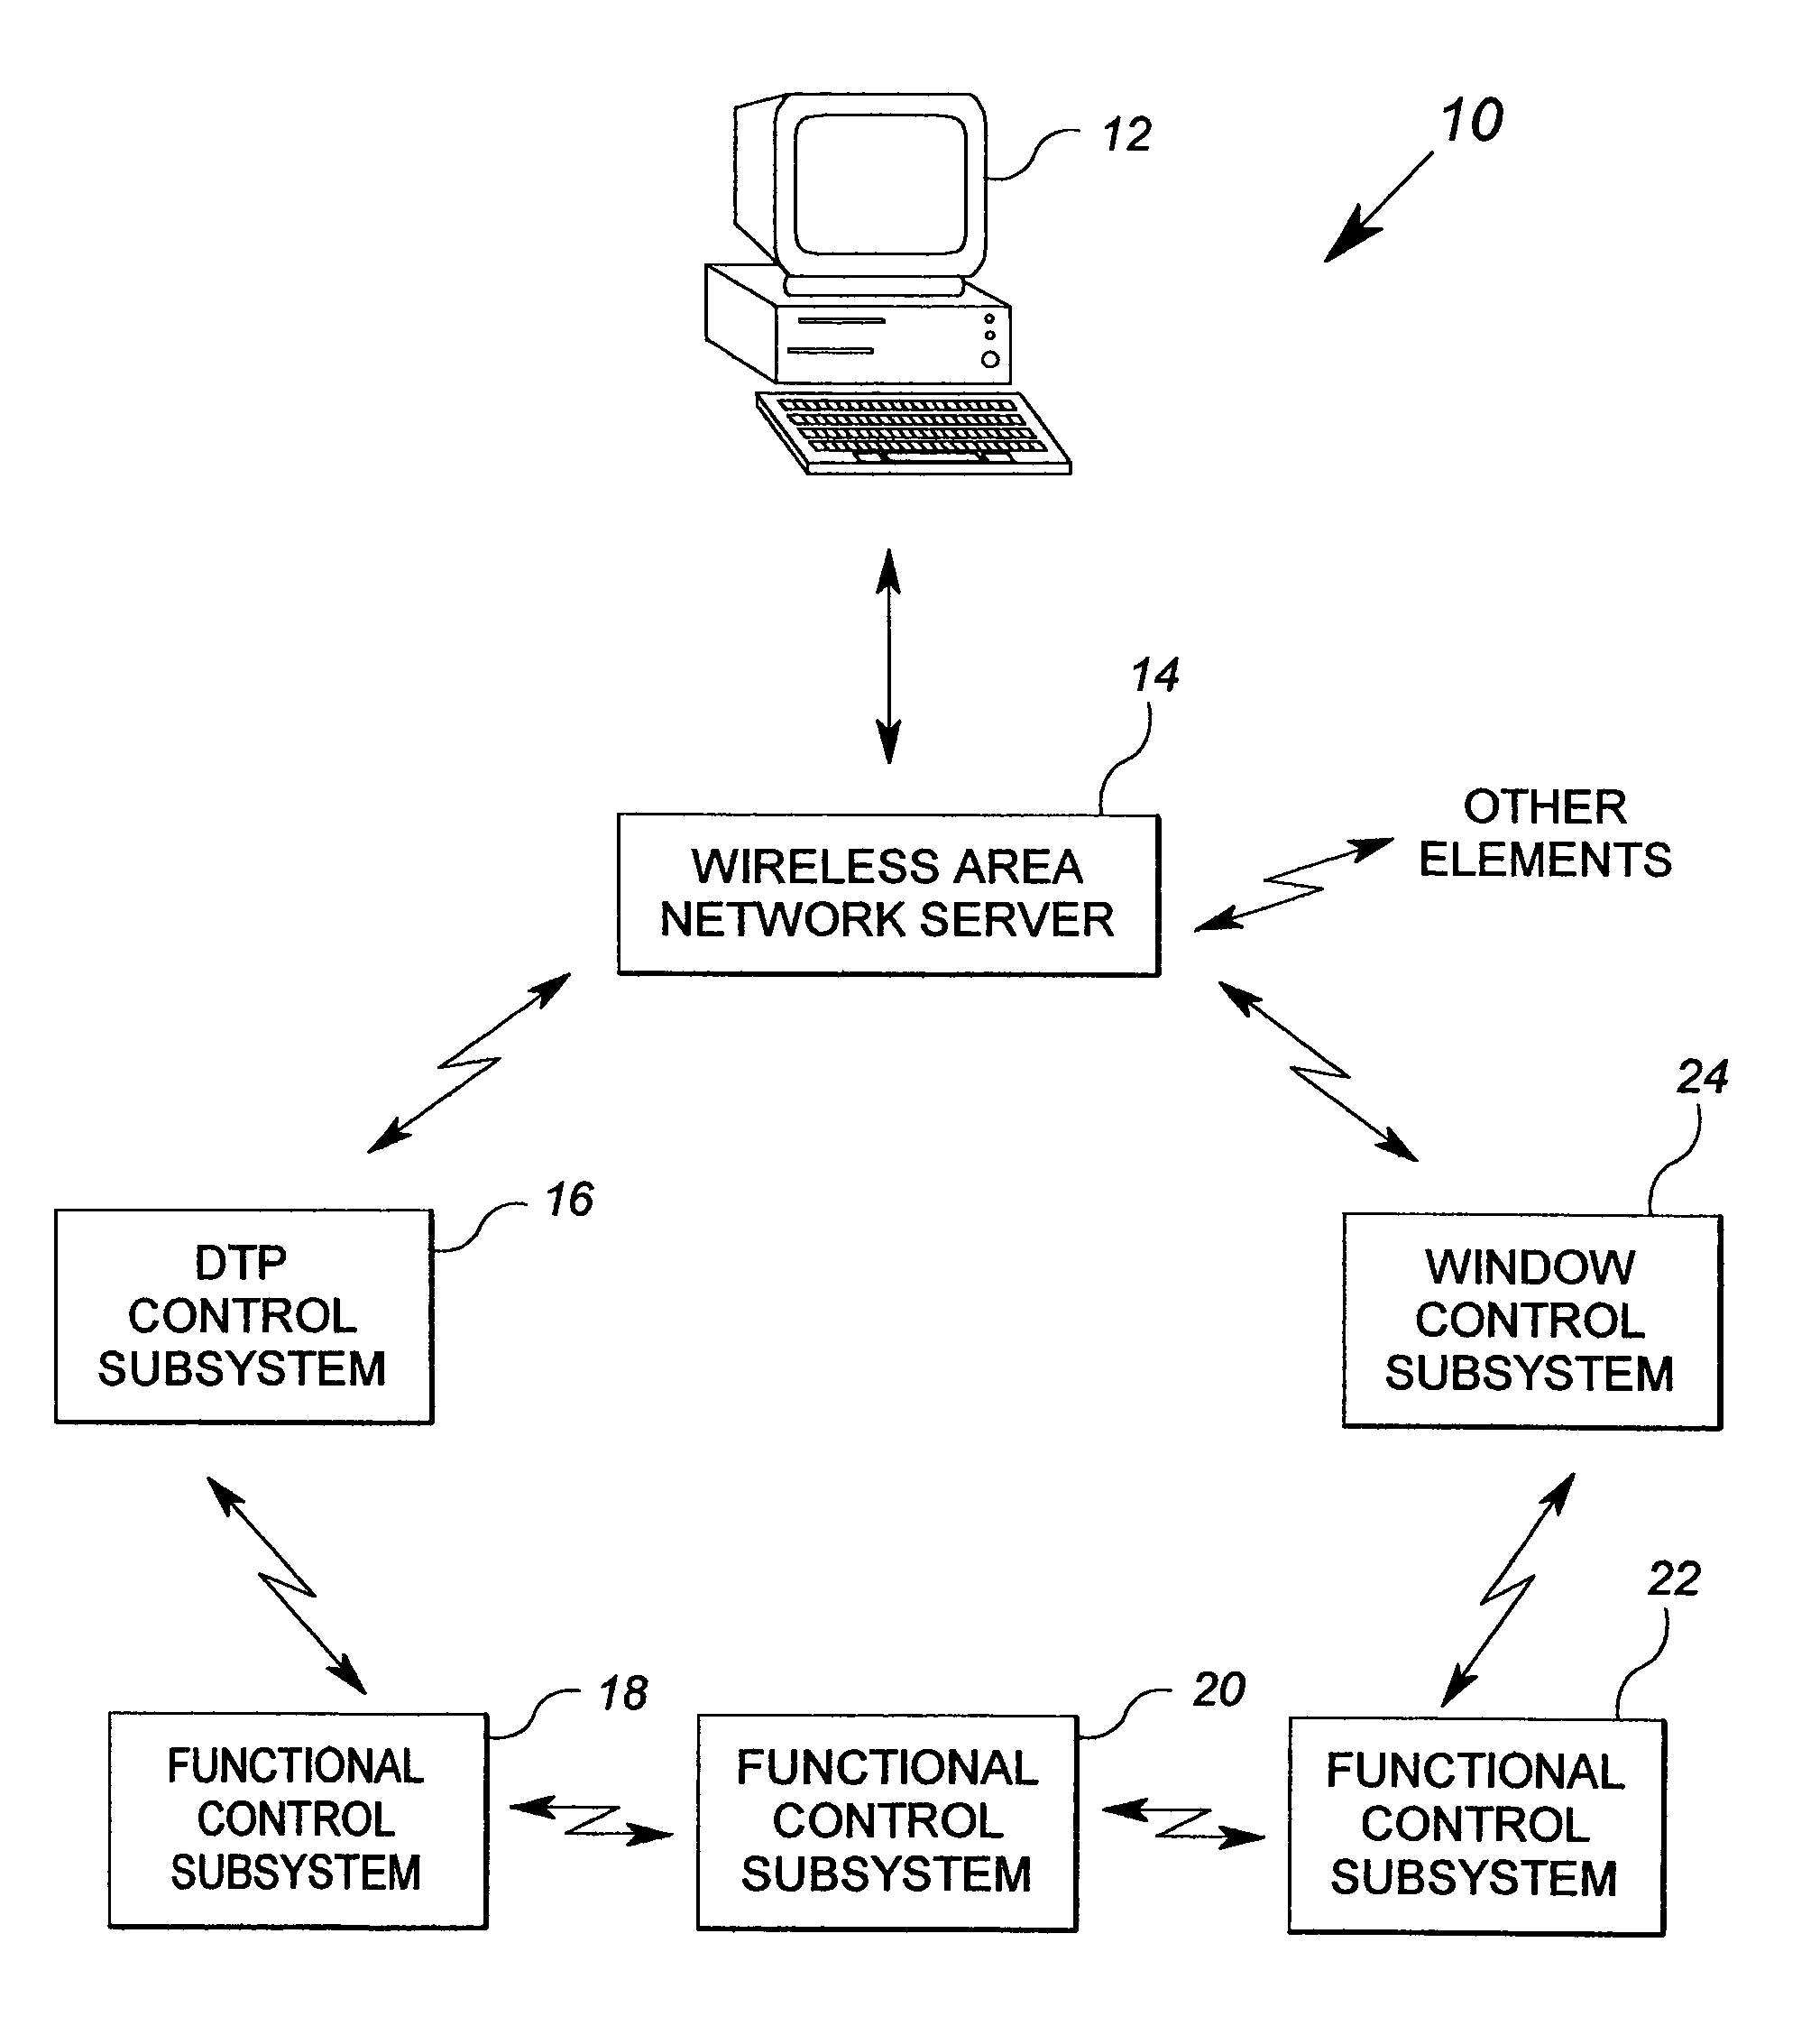 Method and apparatus for graphical display of a condition in a building system with a mobile display unit